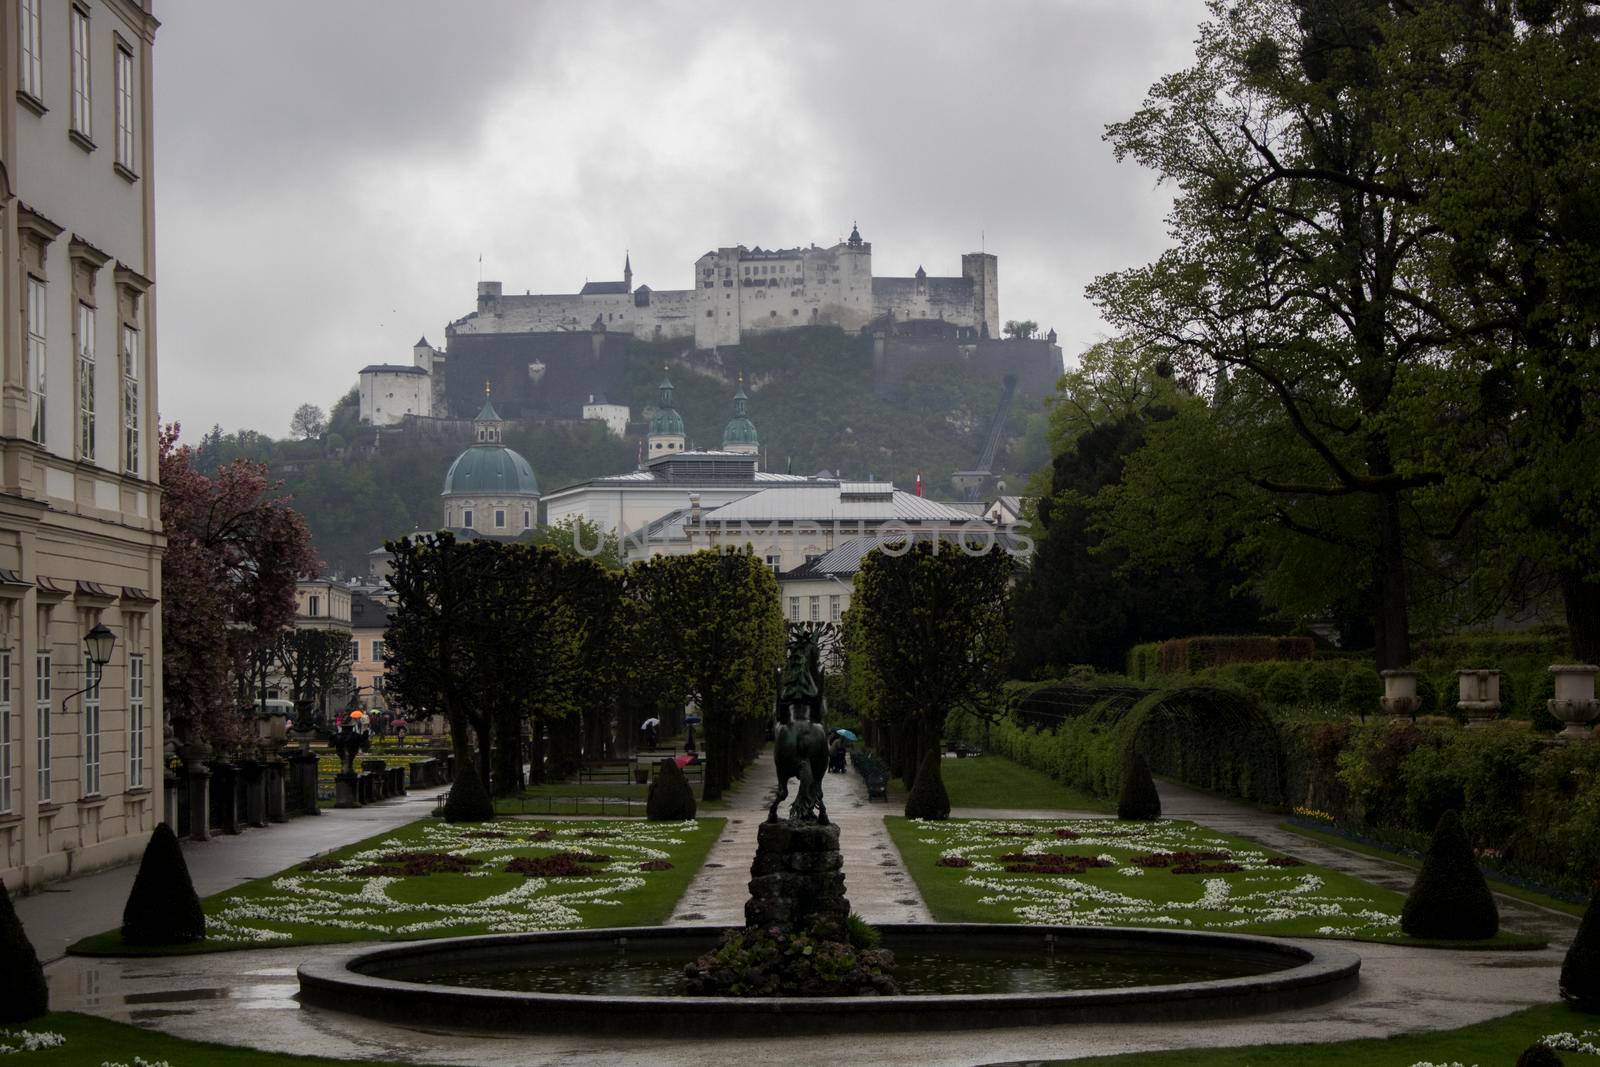 Mirabell Palace and gardens perspective and a castle in the background under a stormy sky in Salzburg